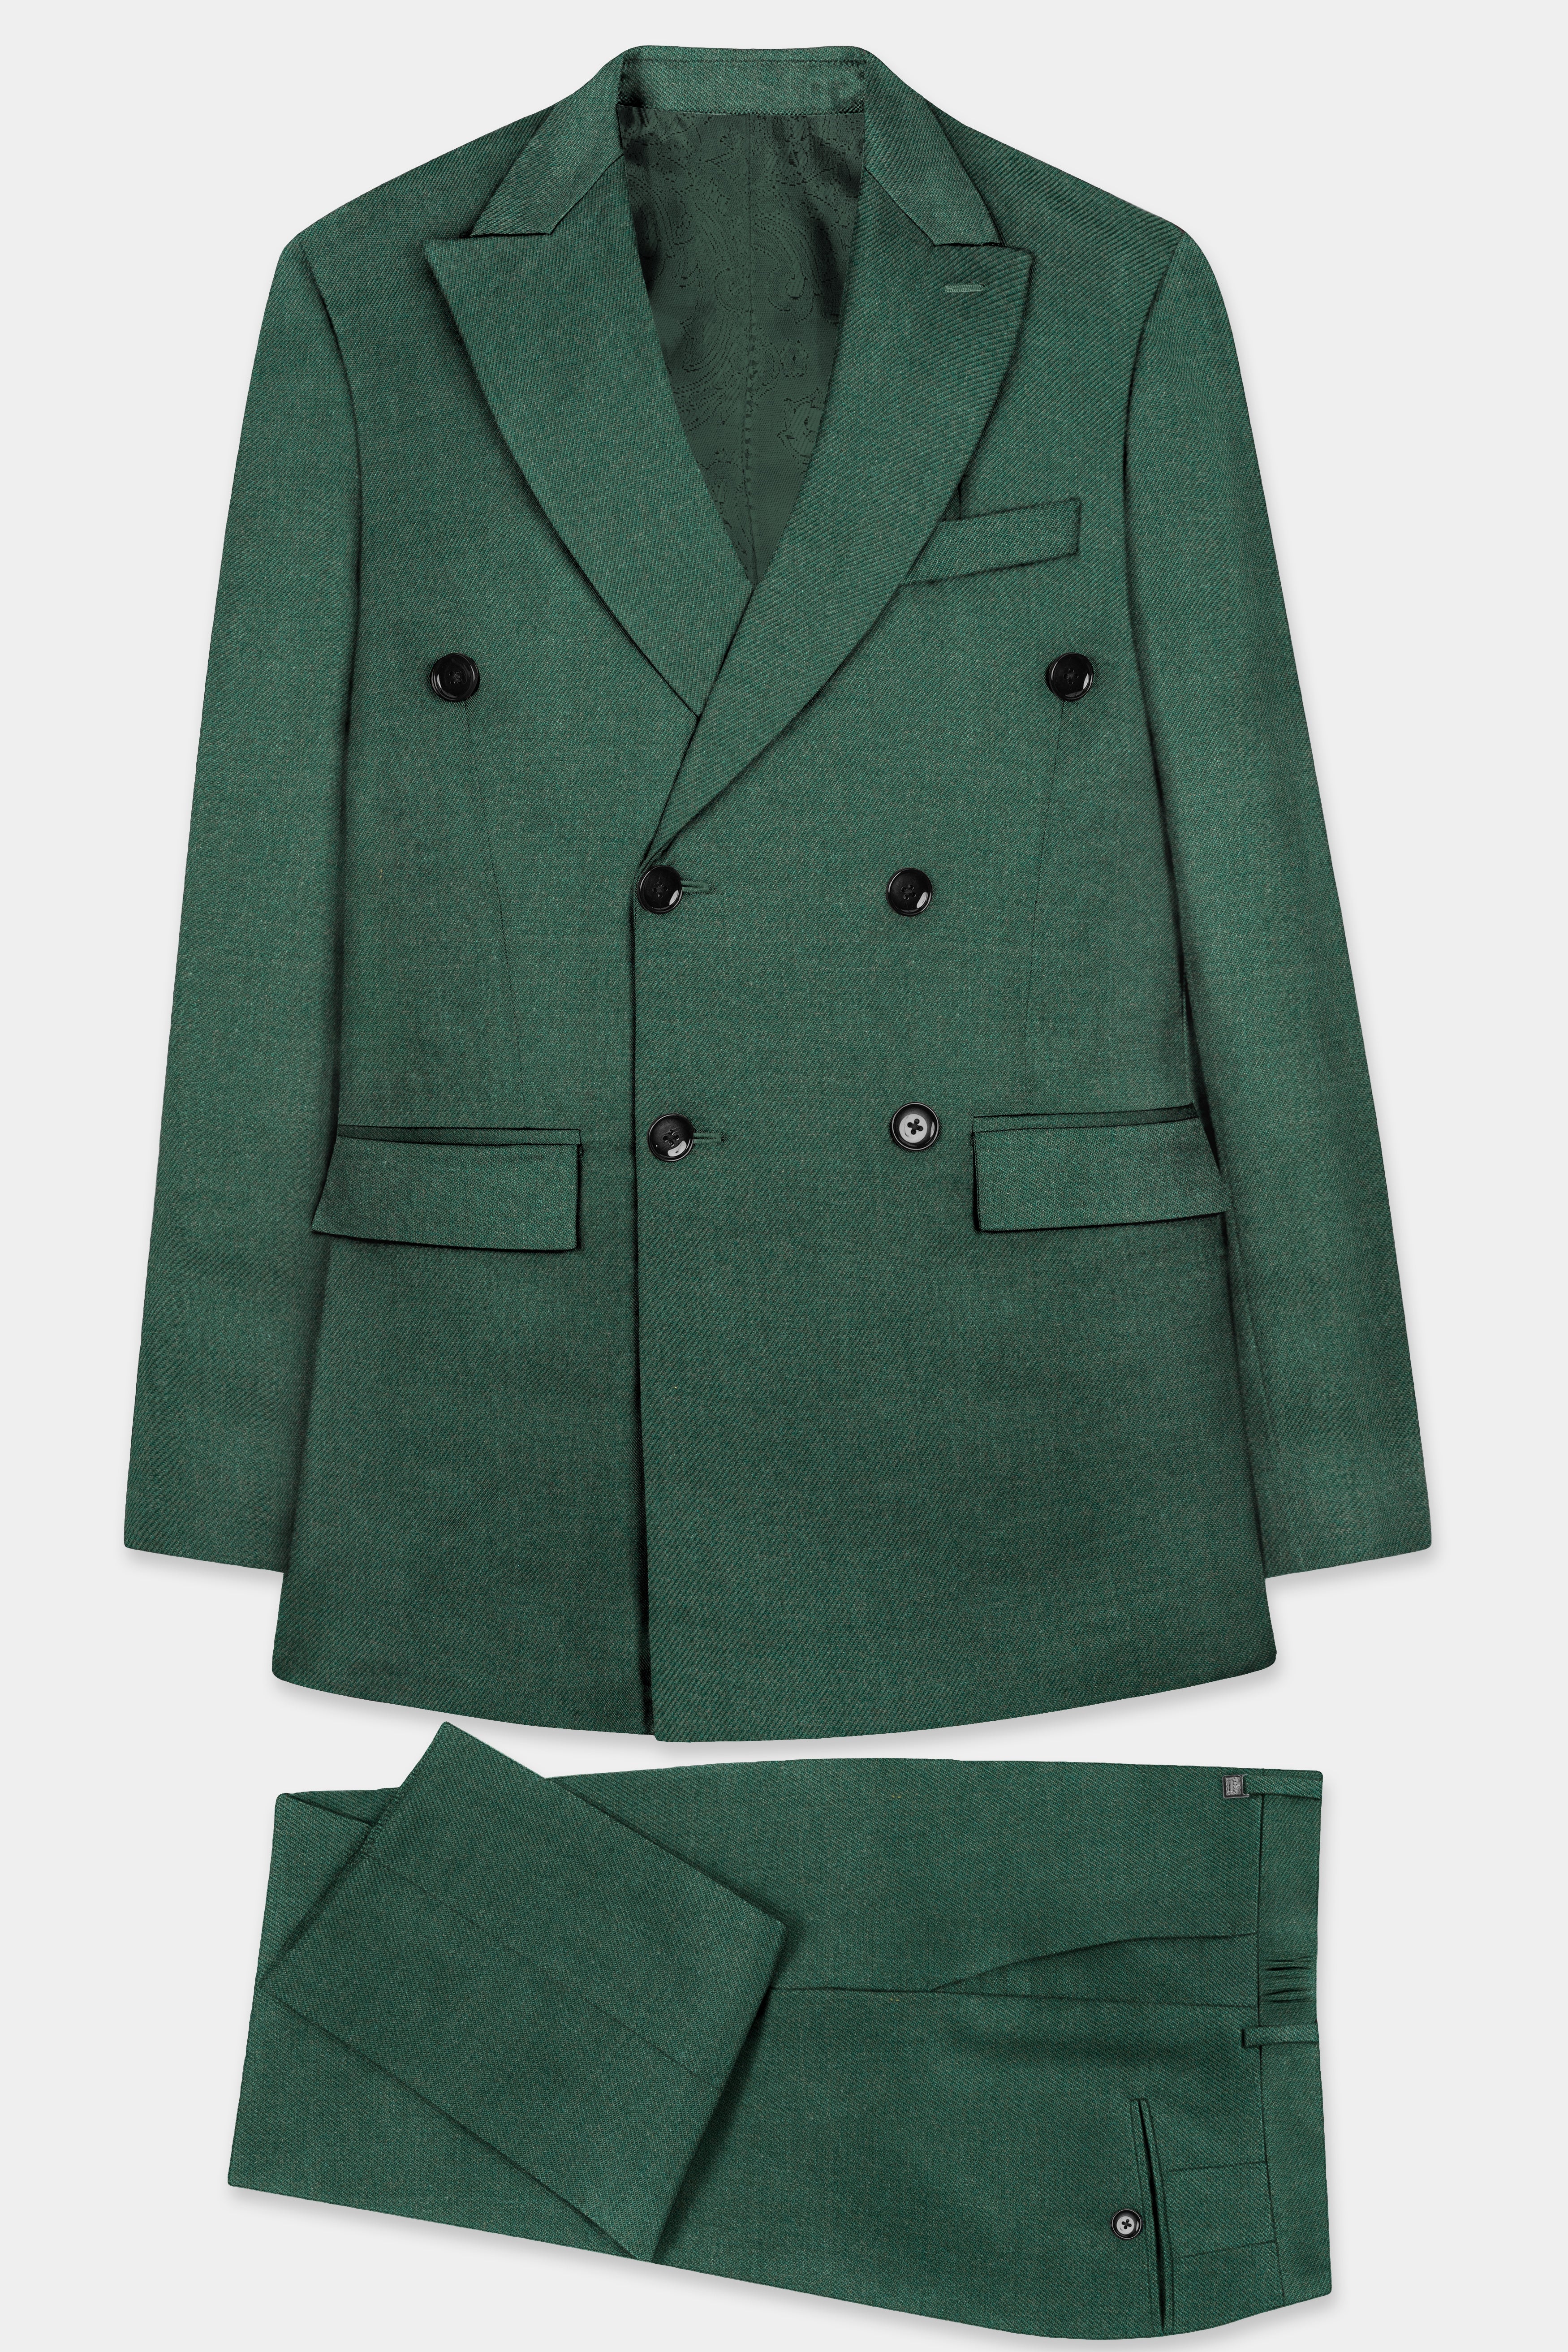 Plantation Green Tweed Double Breasted Suit